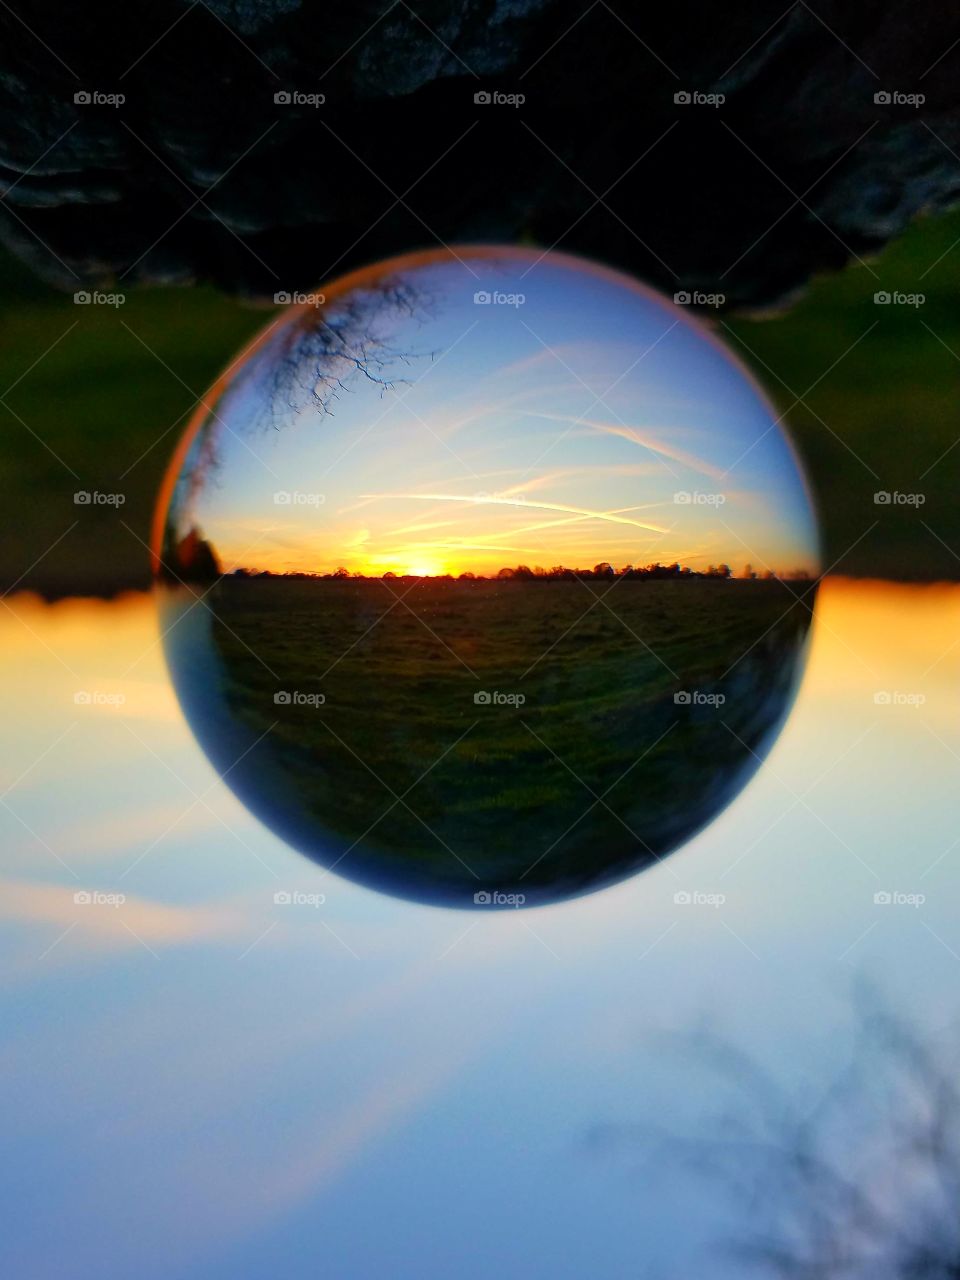 Colorful sunset through the Lens Ball